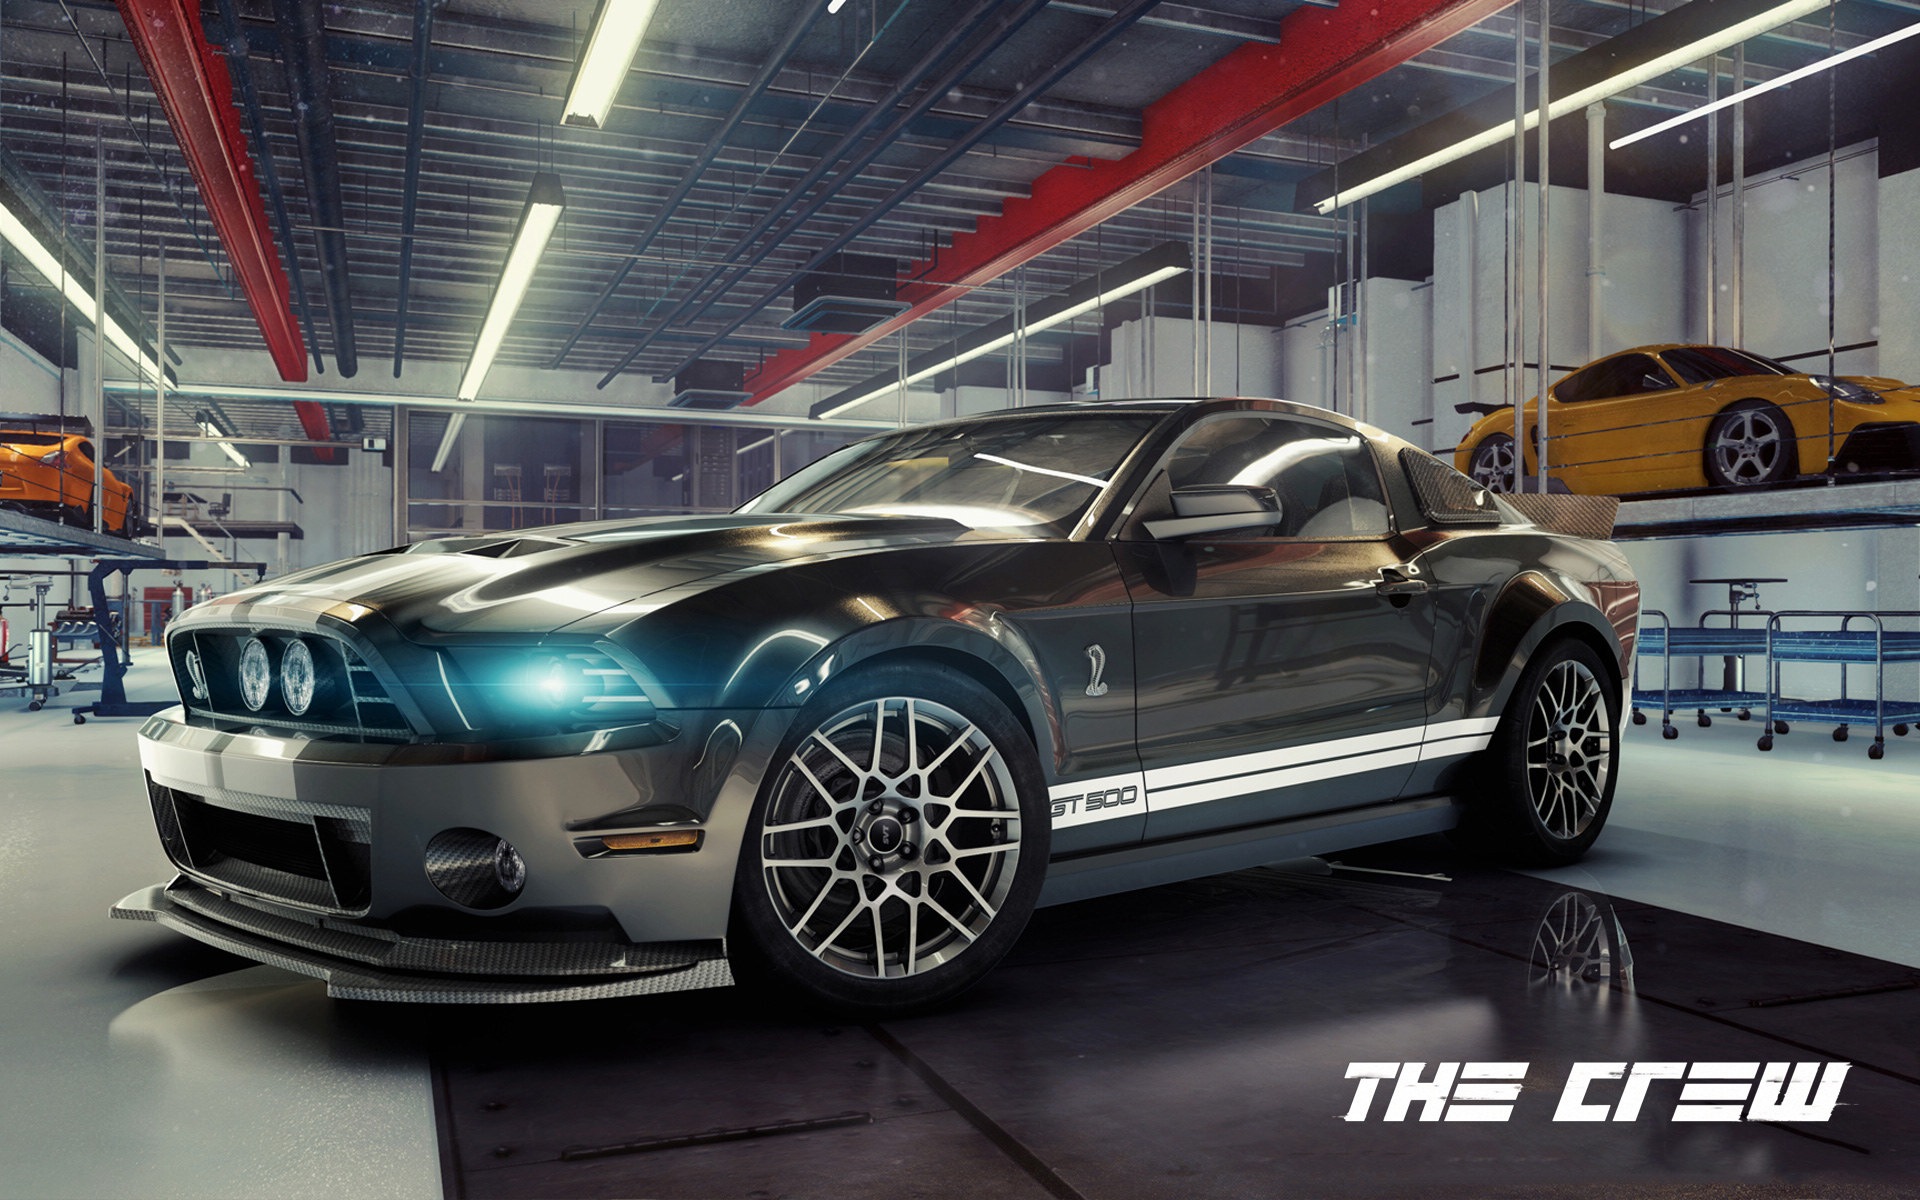 The Crew game HD wallpapers #11 - 1920x1200